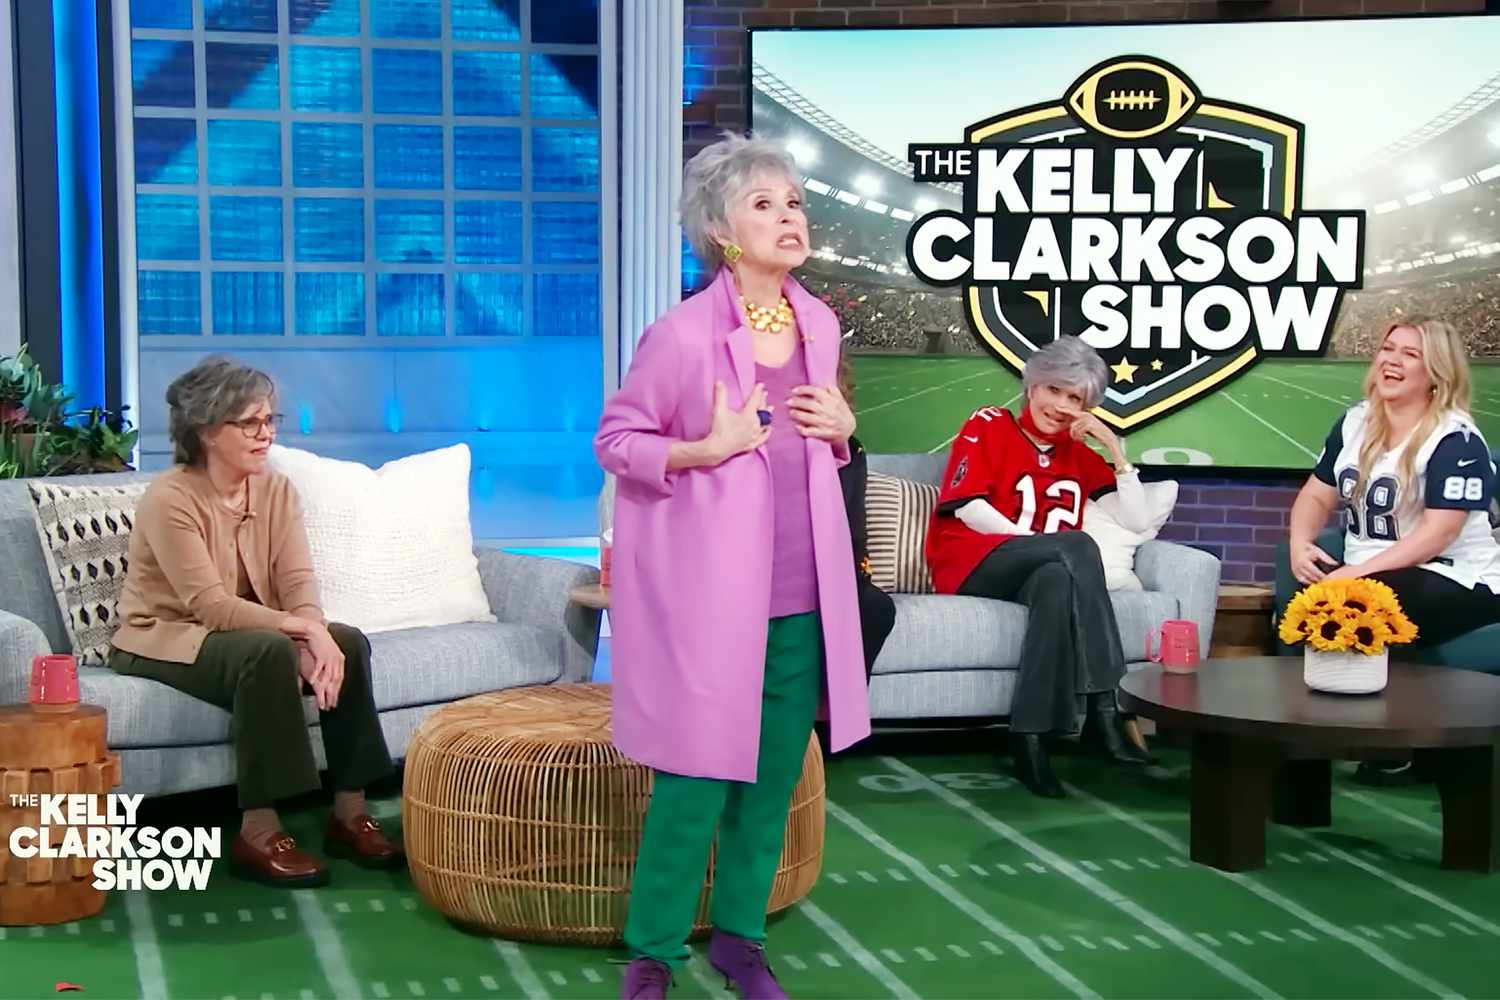 https://www.youtube.com/watch?v=Ob7Feo-_PBw Sally Field & Rita Moreno Attended Jane Fonda's Workout Class In The '80s The Kelly Clarkson Show 2.29M subscribers Subscribe 1.4K Share Download 77,516 views Jan 23, 2023 #LilyTomlin #KellyClarksonShow #JaneFonda "80 for Brady" stars Sally Field and Lily Tomlin dish on their athletic backgrounds, and Sally reacts to an amazing throwback cheerleading photo from before her days as "Gidget." Sally and fellow co-star Rita Moreno also reminisce about attending Jane Fonda's original workout classes in the San Fernando Valley before knowing each other, and Jane admits she doesn't remember Rita being there. Jane and Rita also debate who's the funniest out of the "80 for Brady" group. #KellyClarksonShow #SallyField #RitaMoreno #LilyTomlin #JaneFonda Subscribe to The Kelly Clarkson Show: https://bit.ly/2OtOpf8